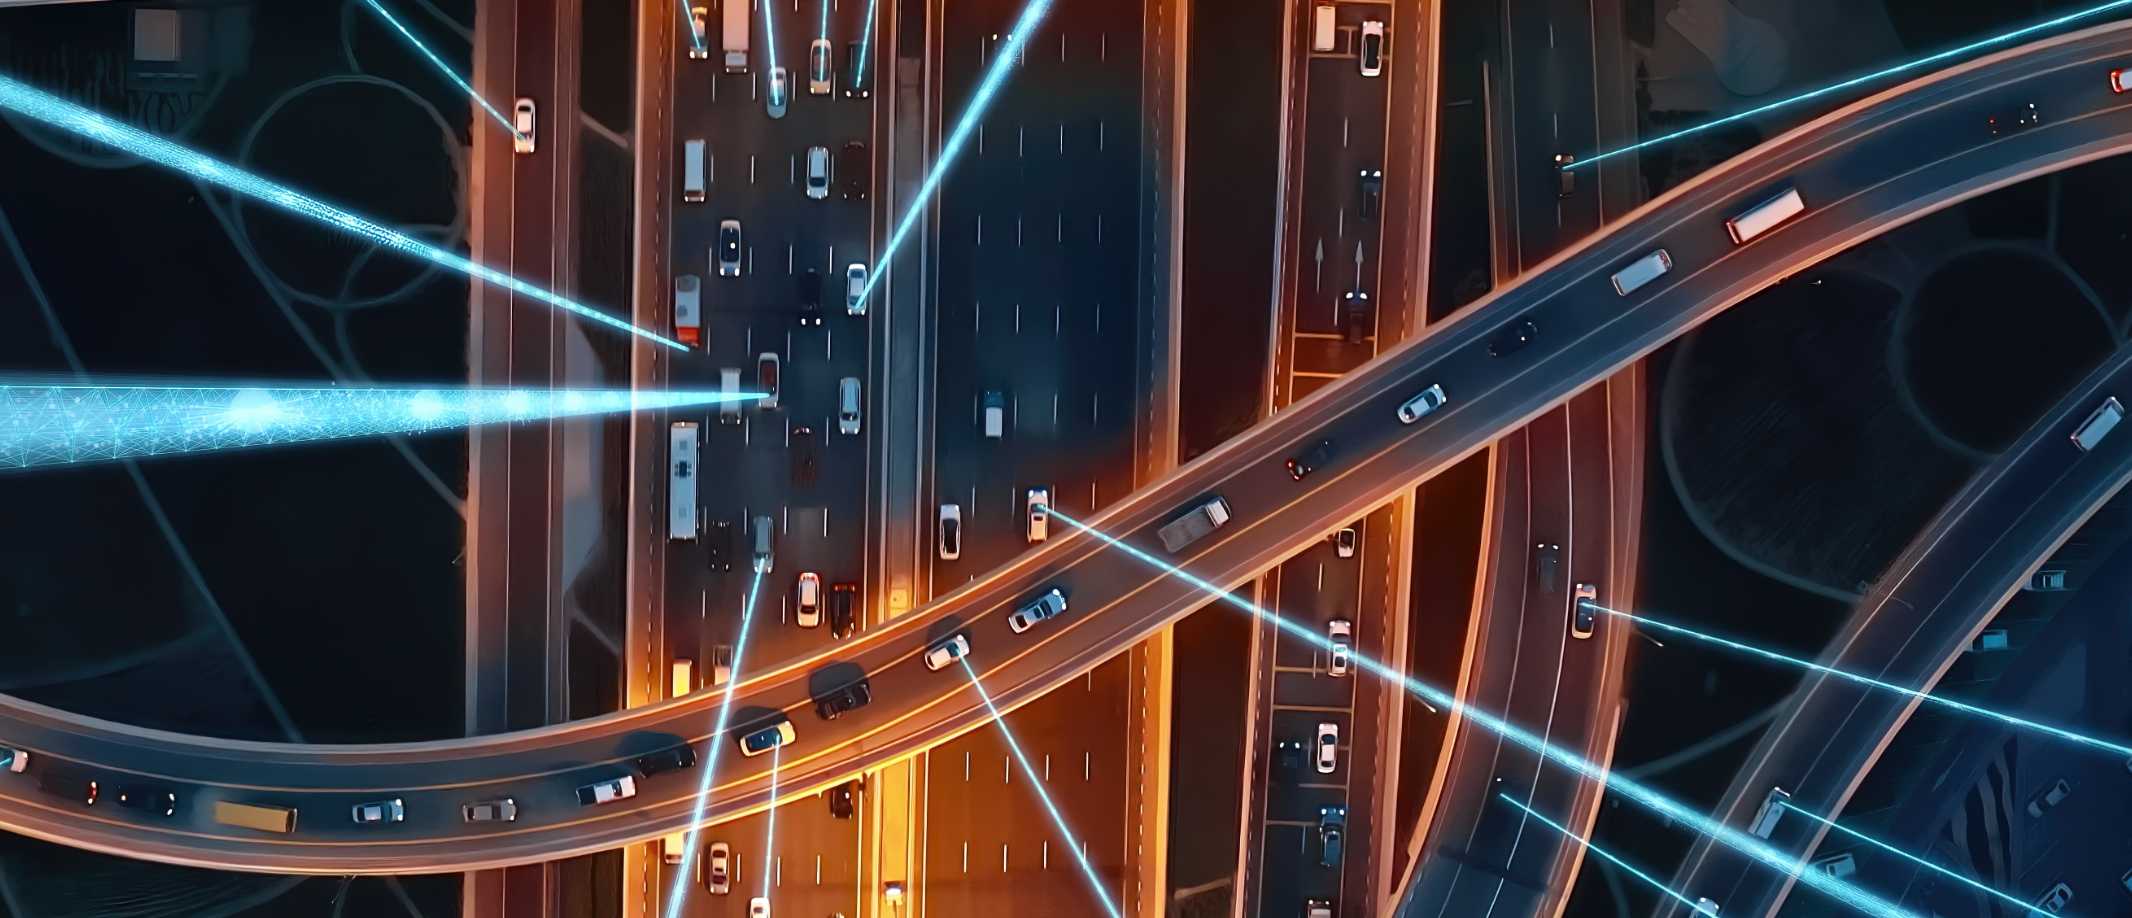 Orbital view of tracking cars on a motorway.